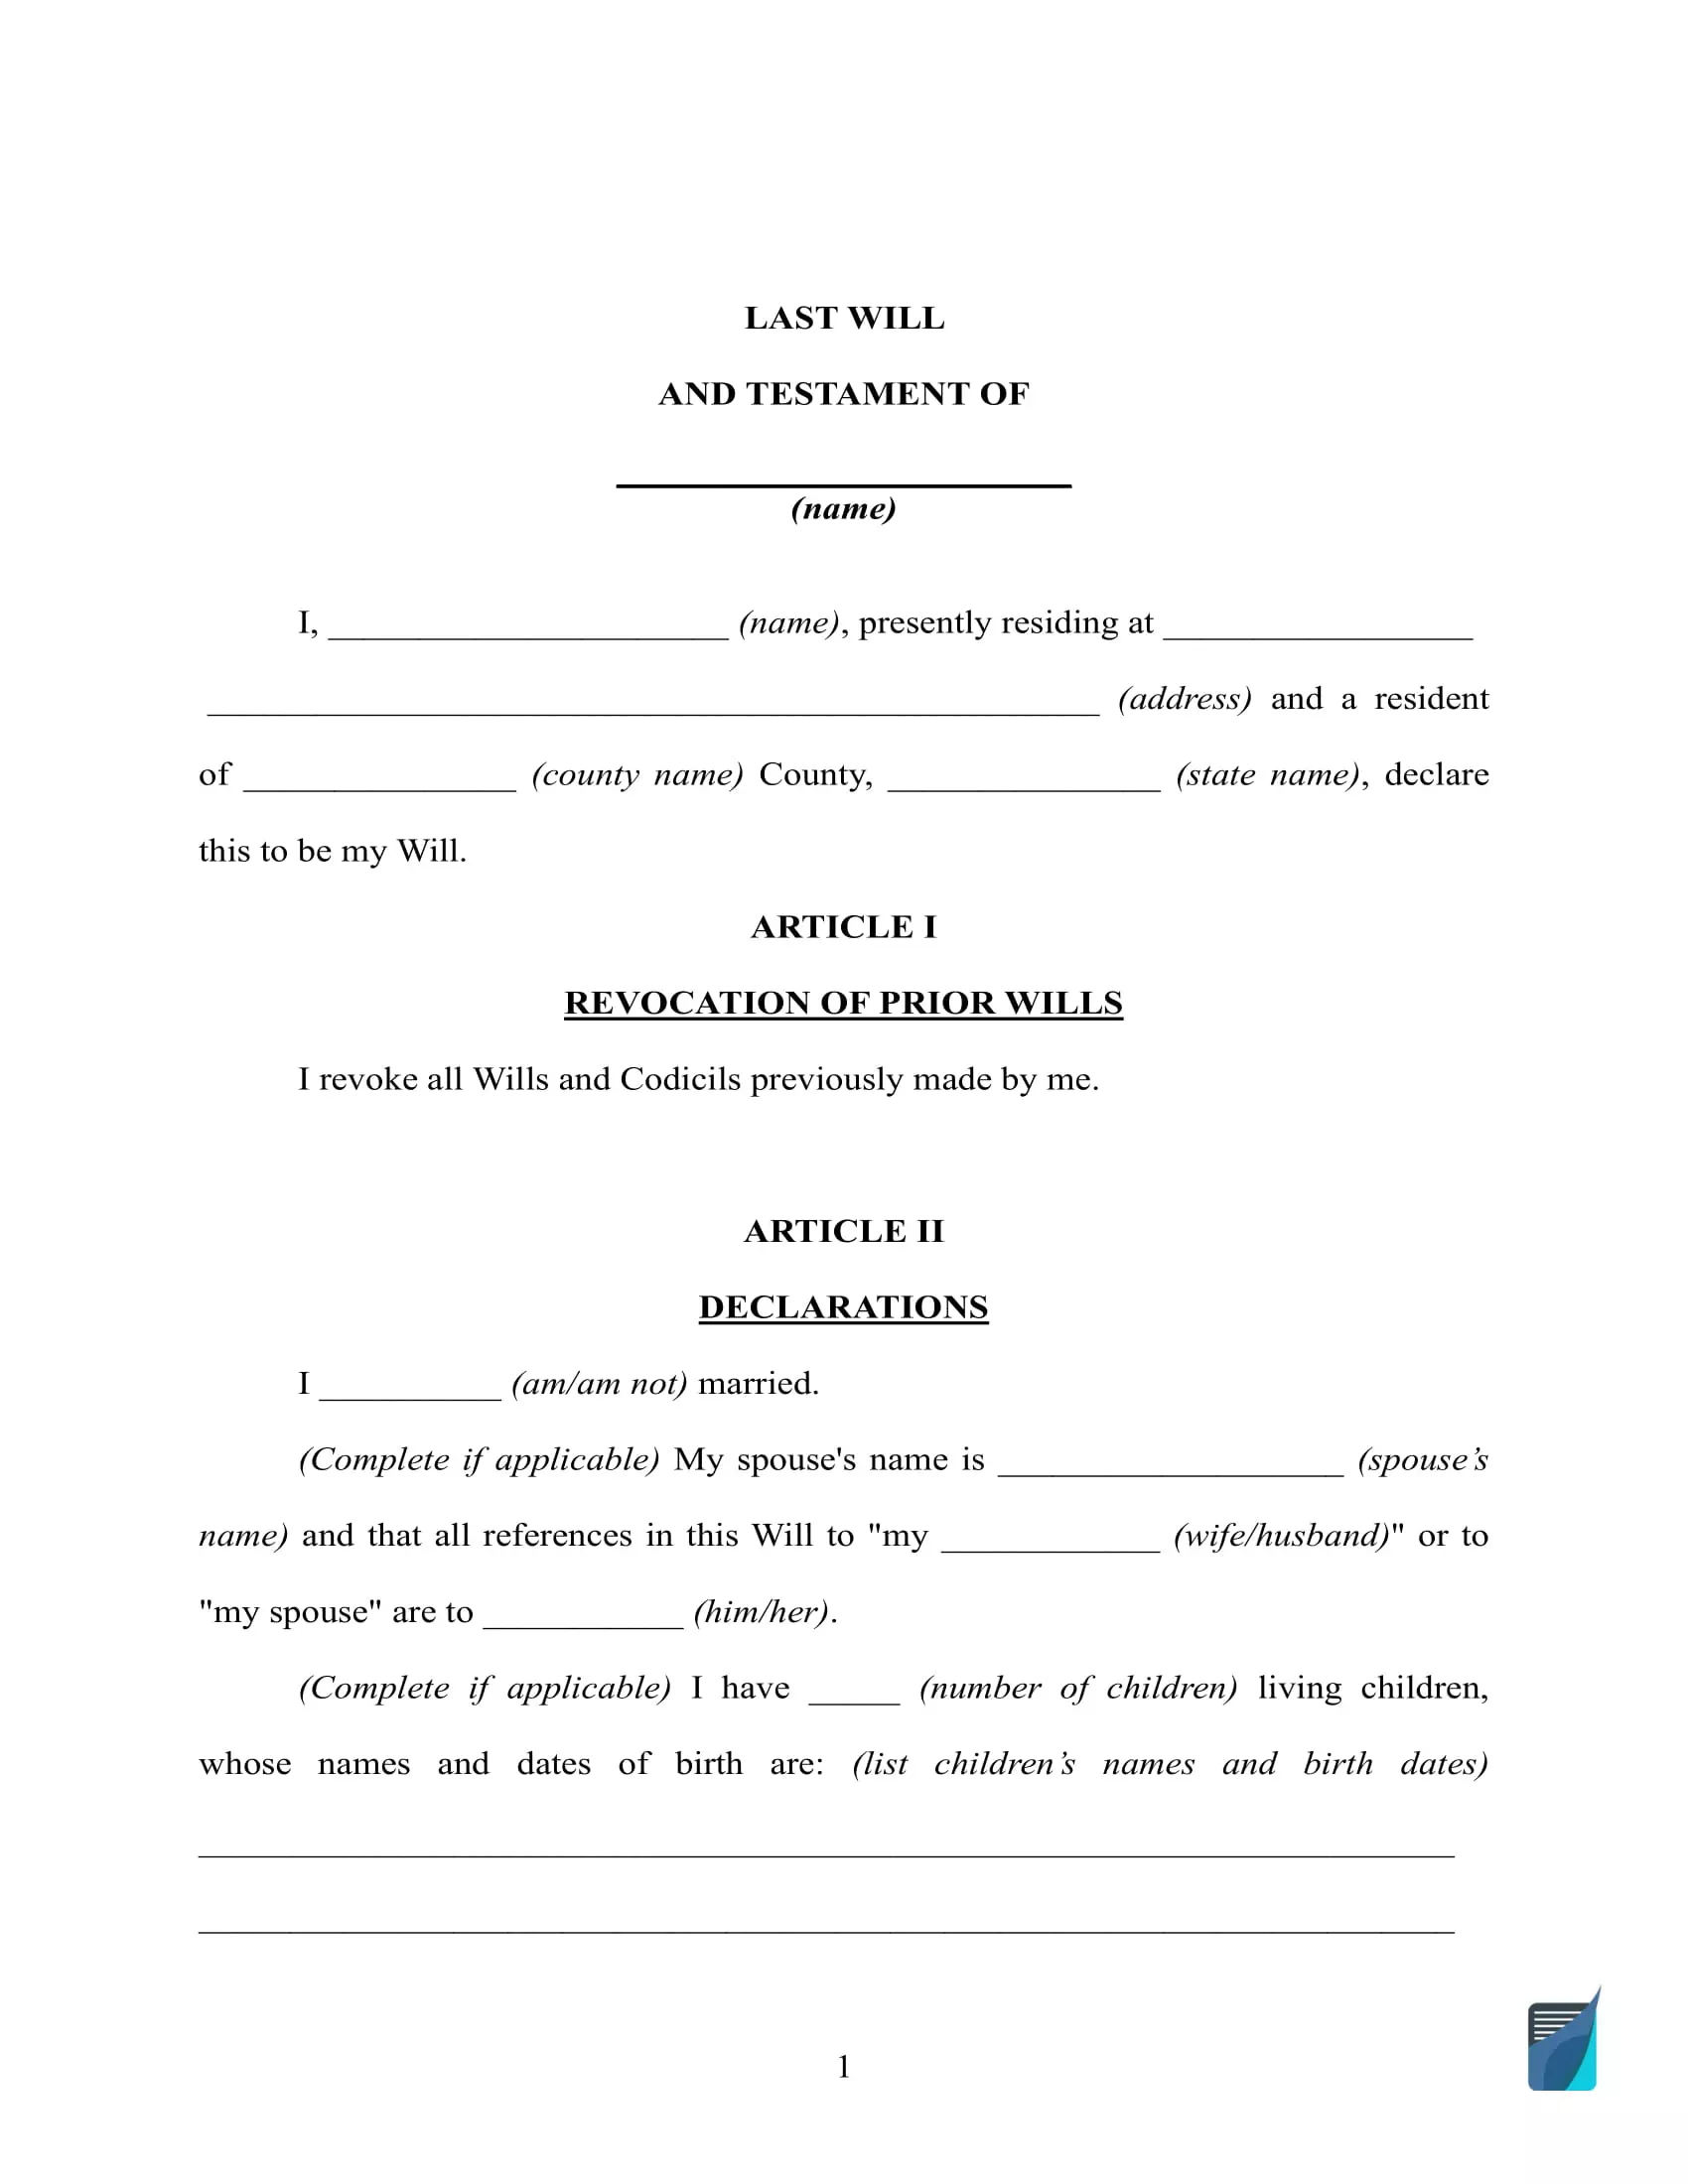 Detail Last Will And Testament Template Nomer 7